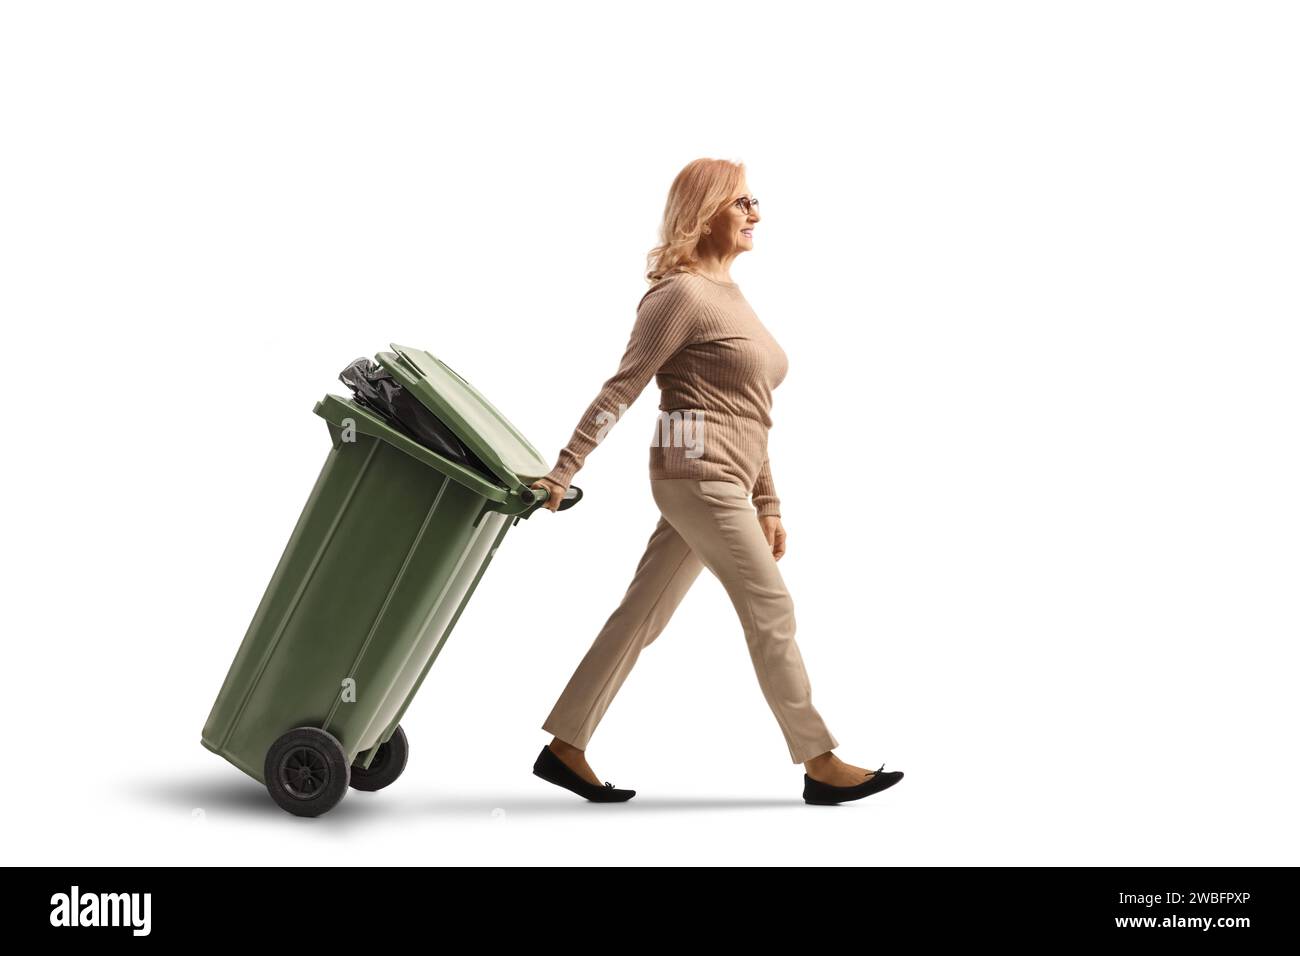 Woman walking and pulling a waste bin isolated on white background Stock Photo